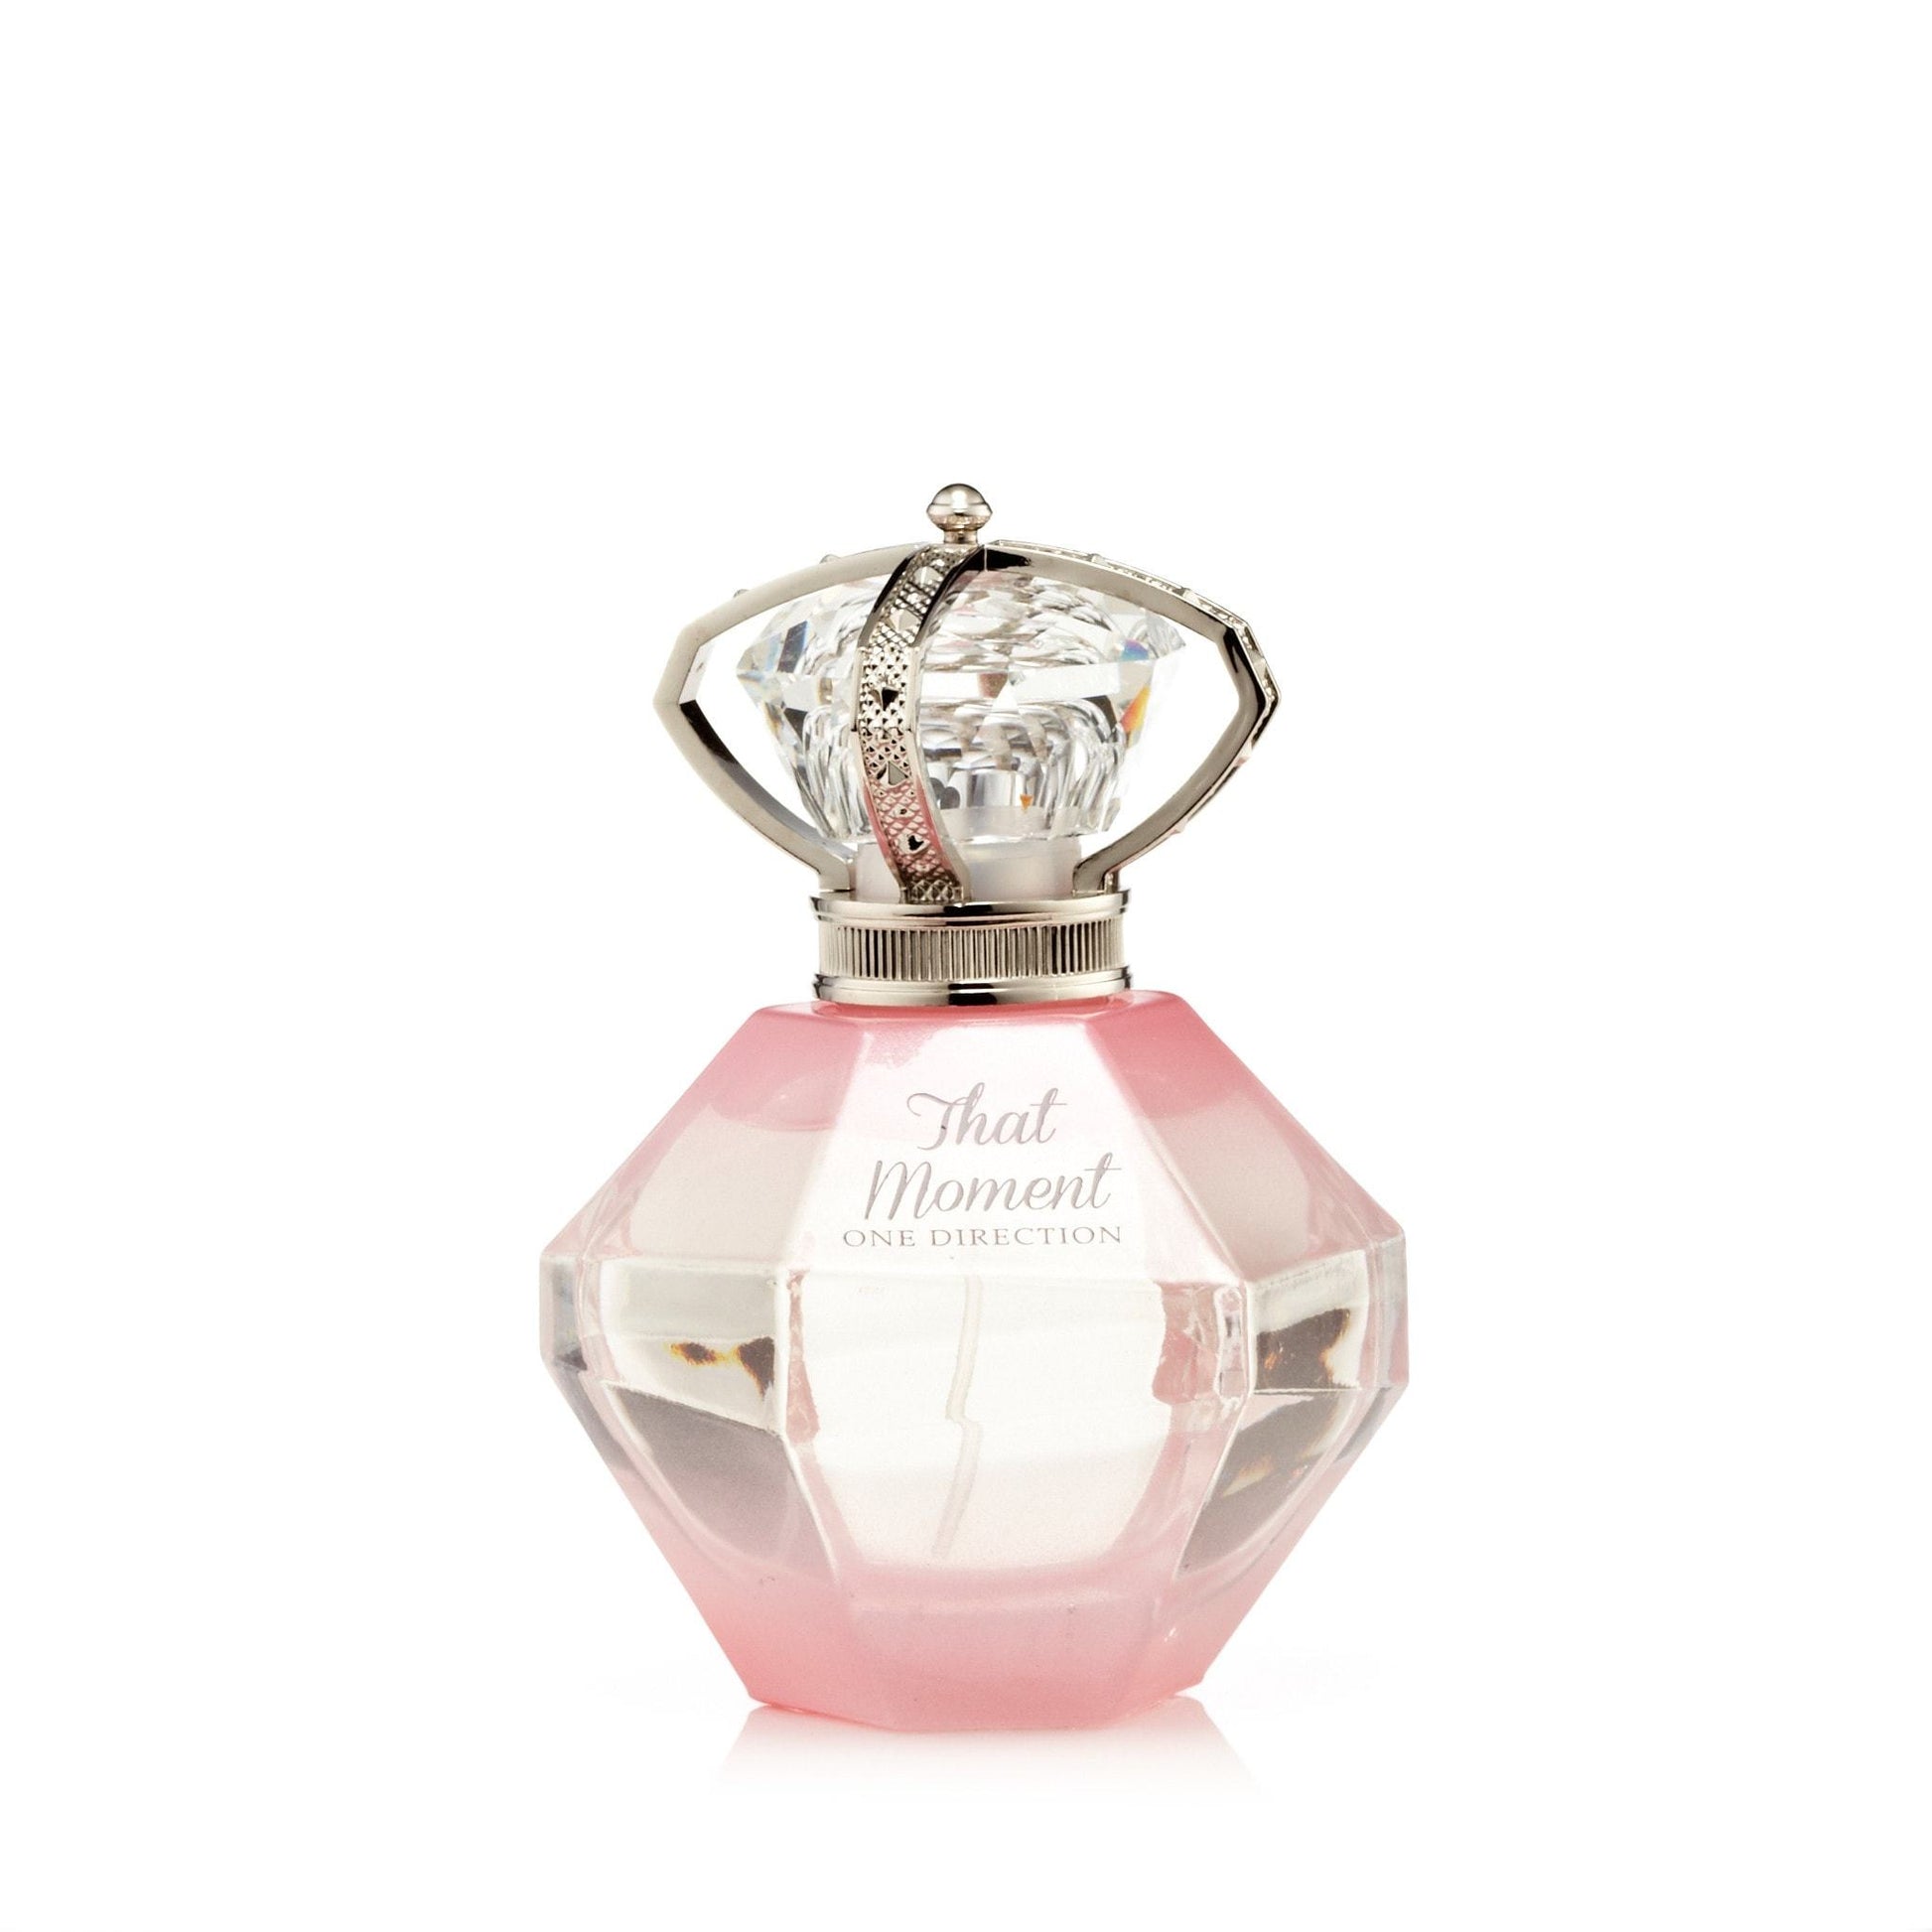 That Moment Eau de Parfum Spray for Women by One Direction, Product image 1